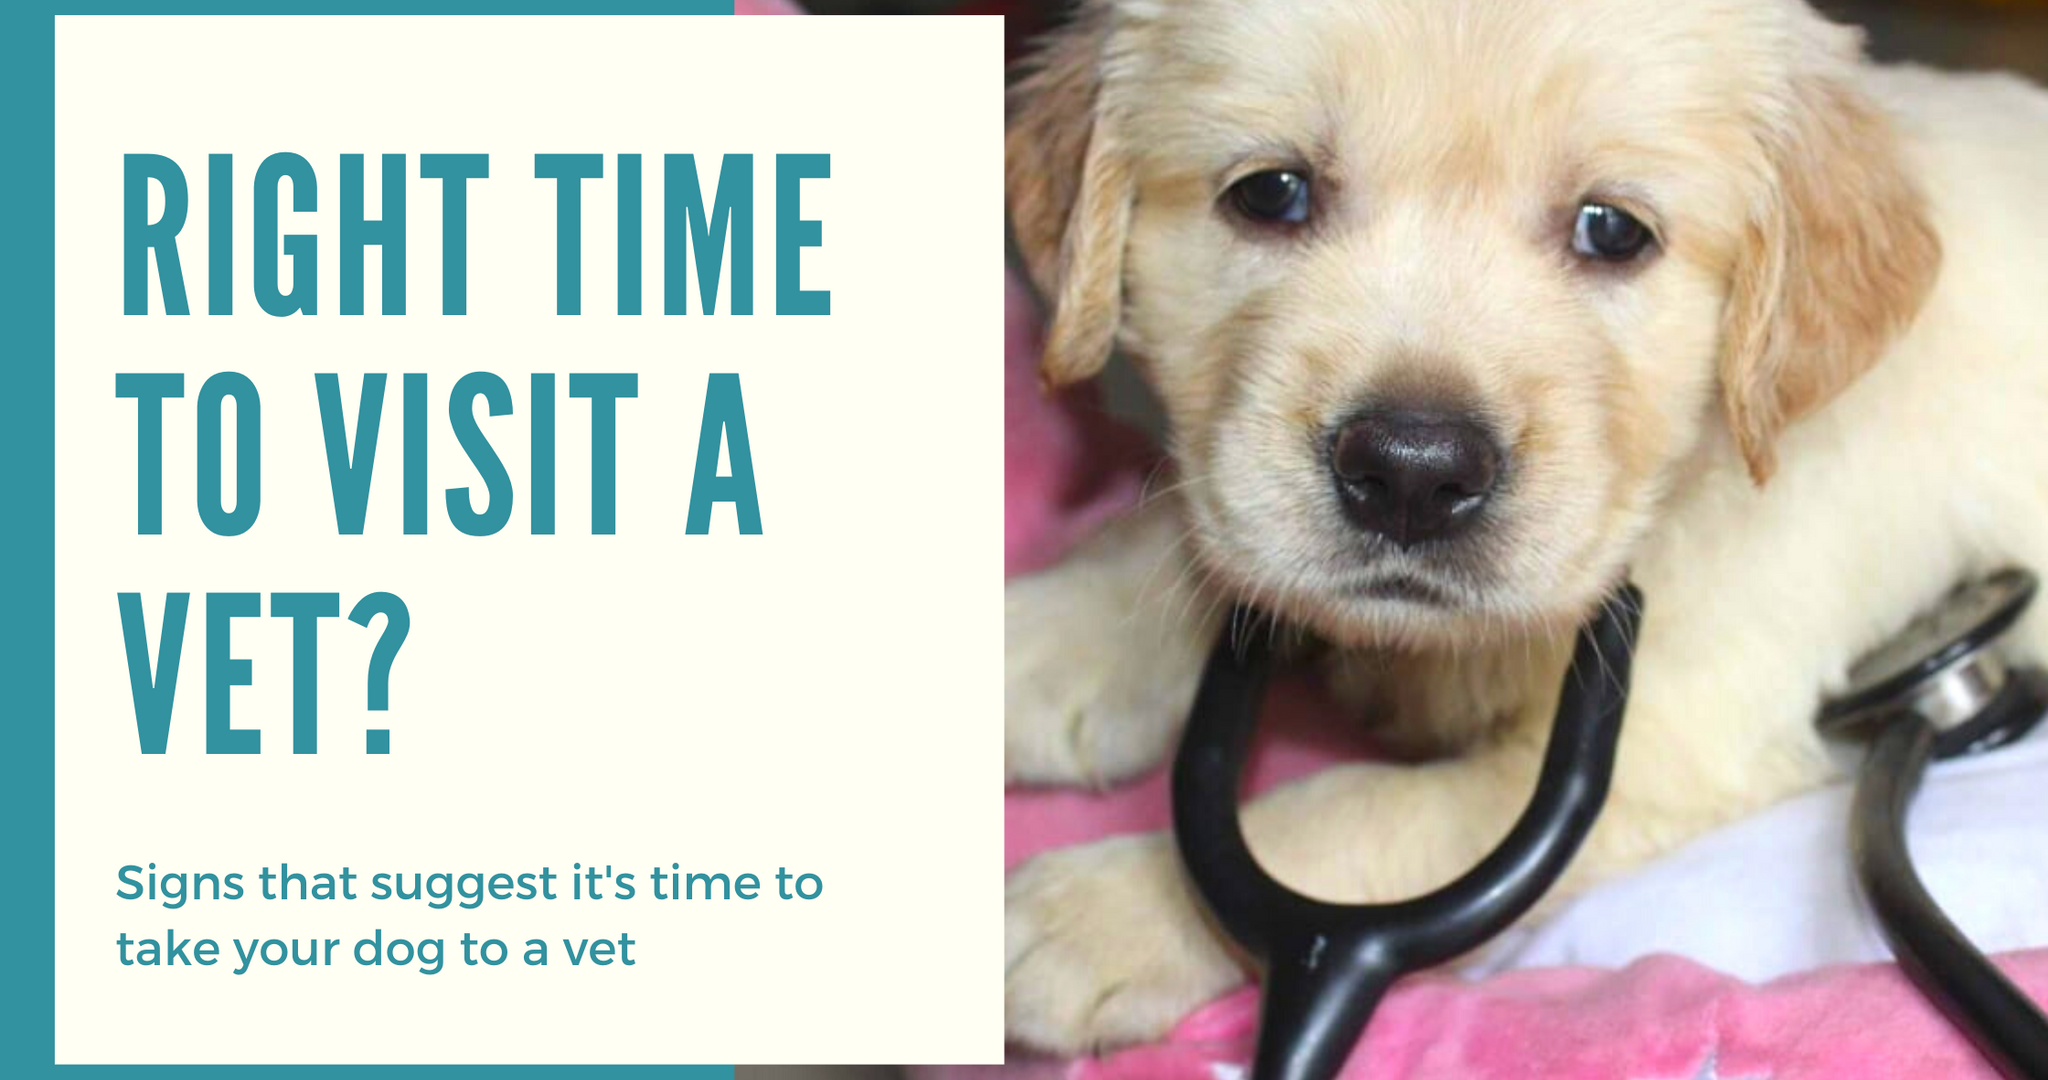 When should I take my dog to a vet?